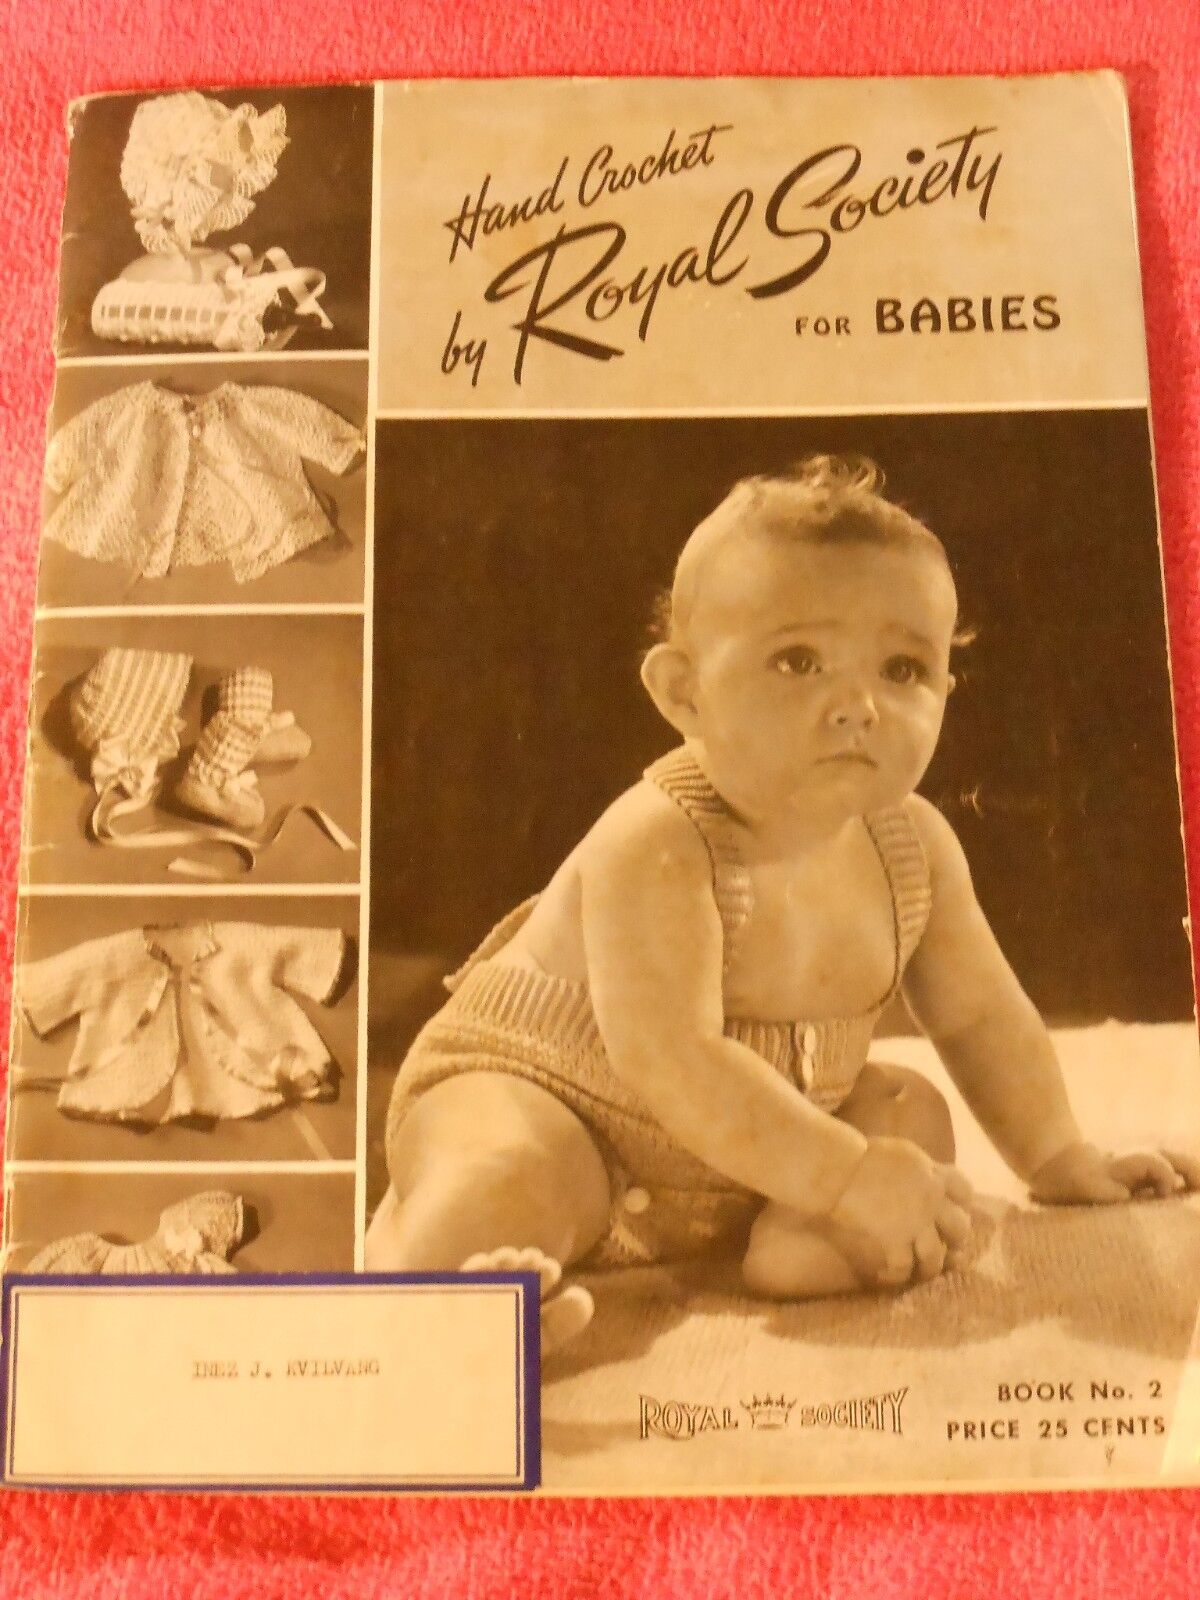 HAND CROCHET BY ROYAL SOCIETY FOR BABIES ELEVENTH EDITION 148 1943